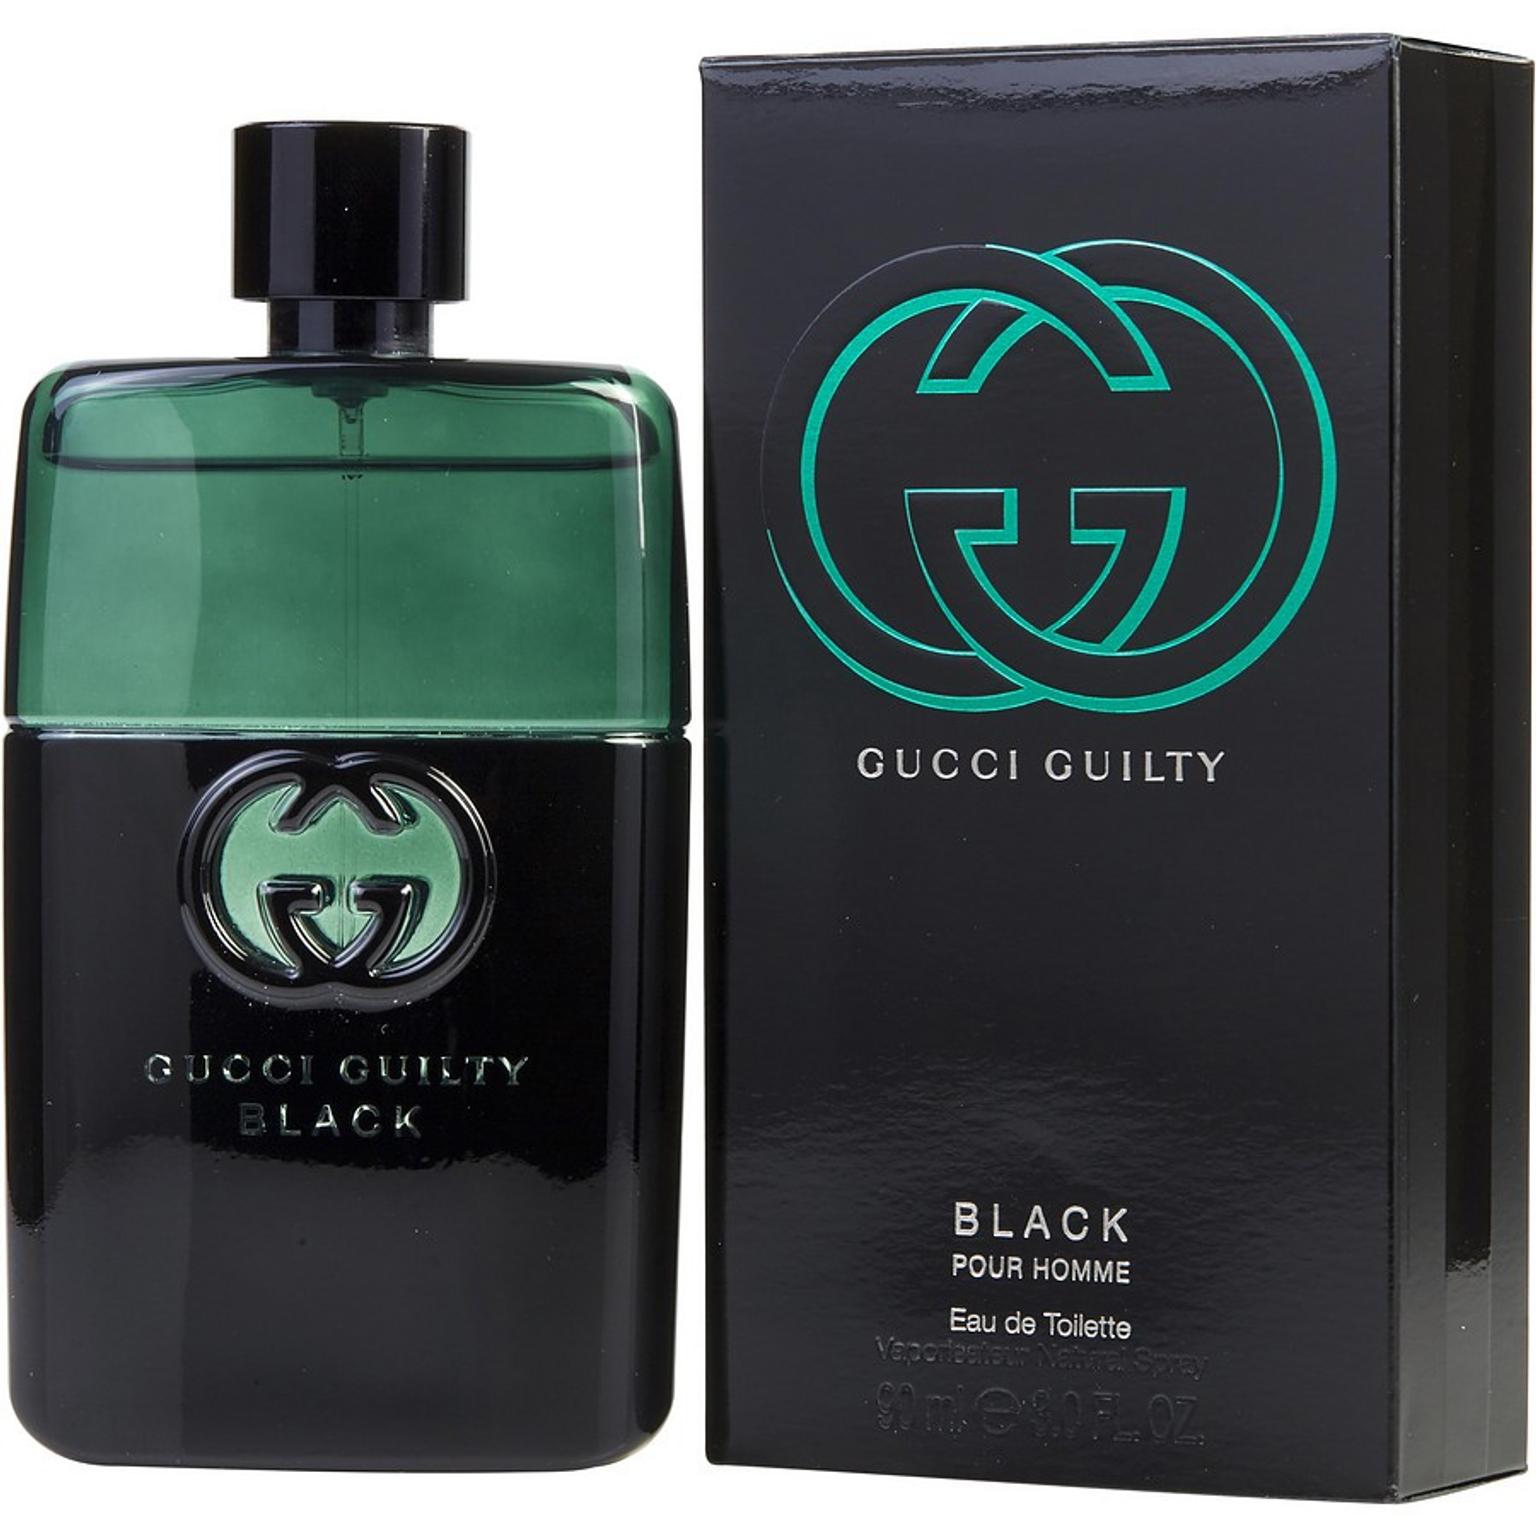 guilty aftershave